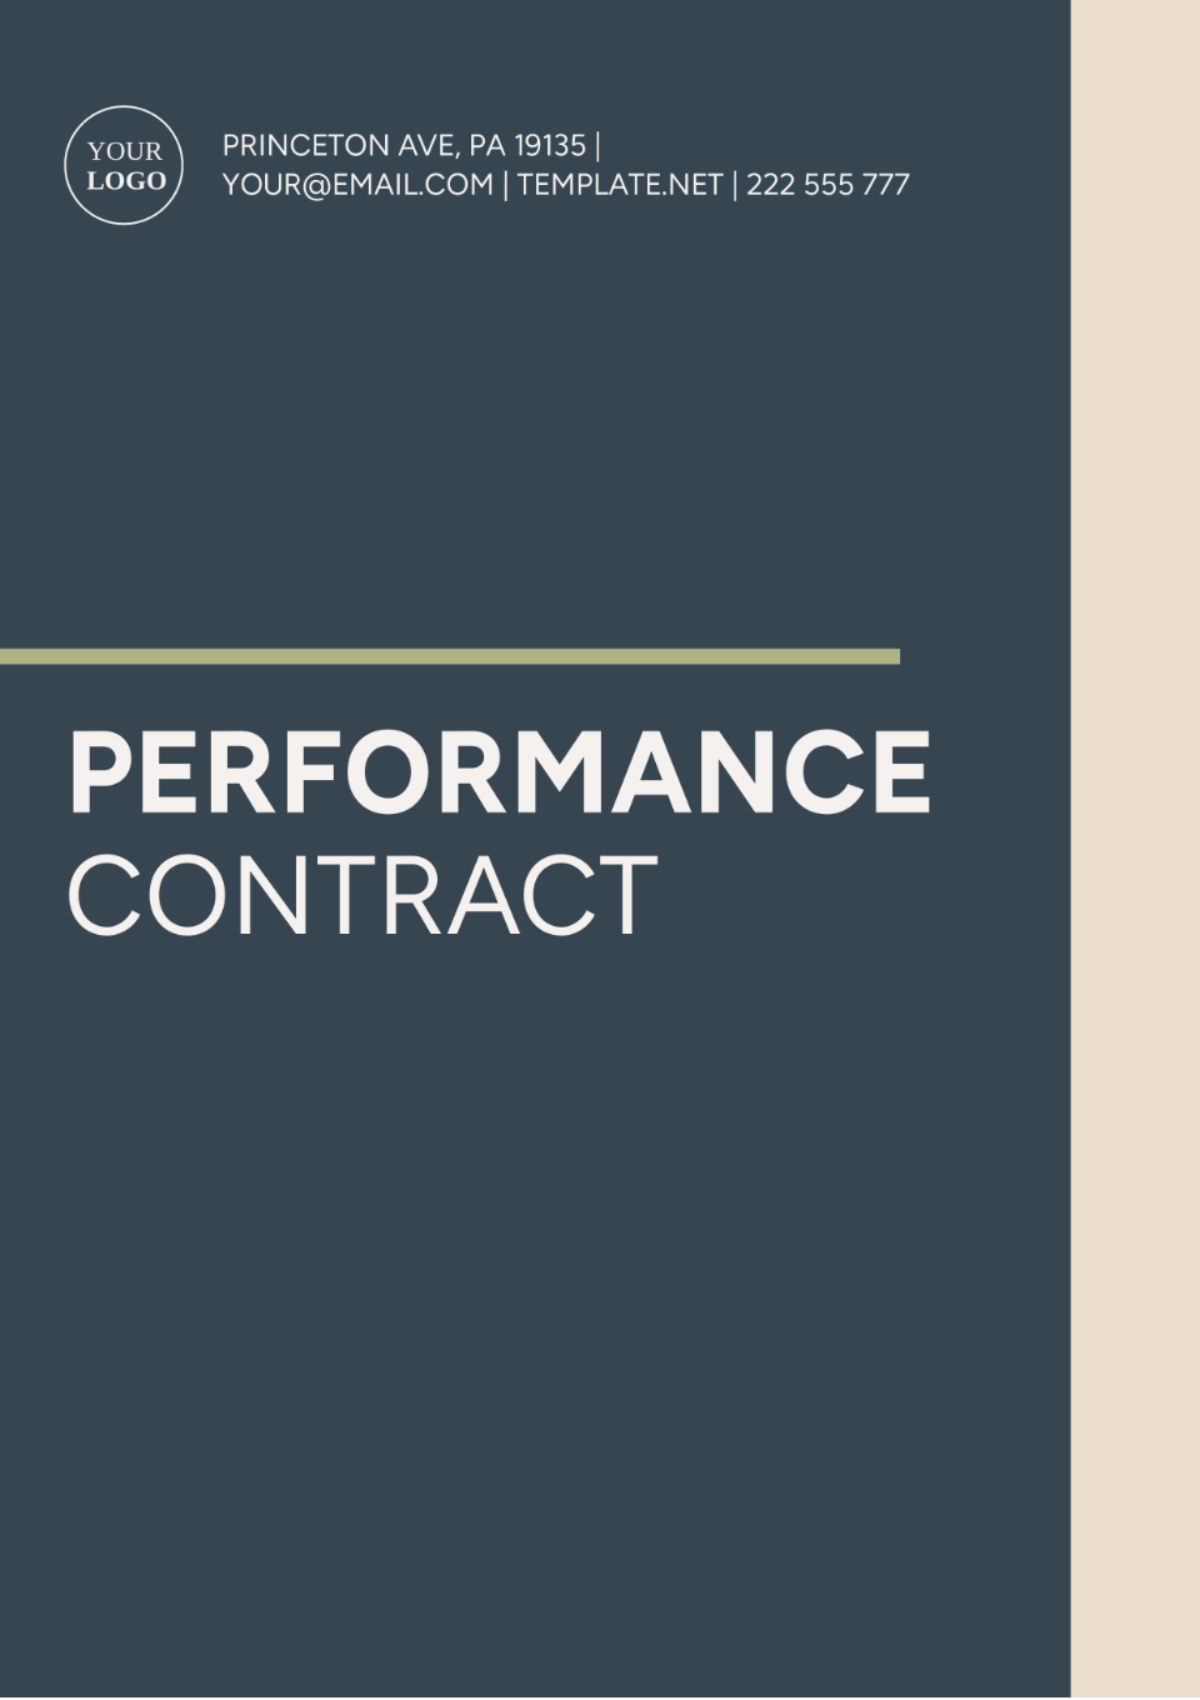 Performance Contract Template